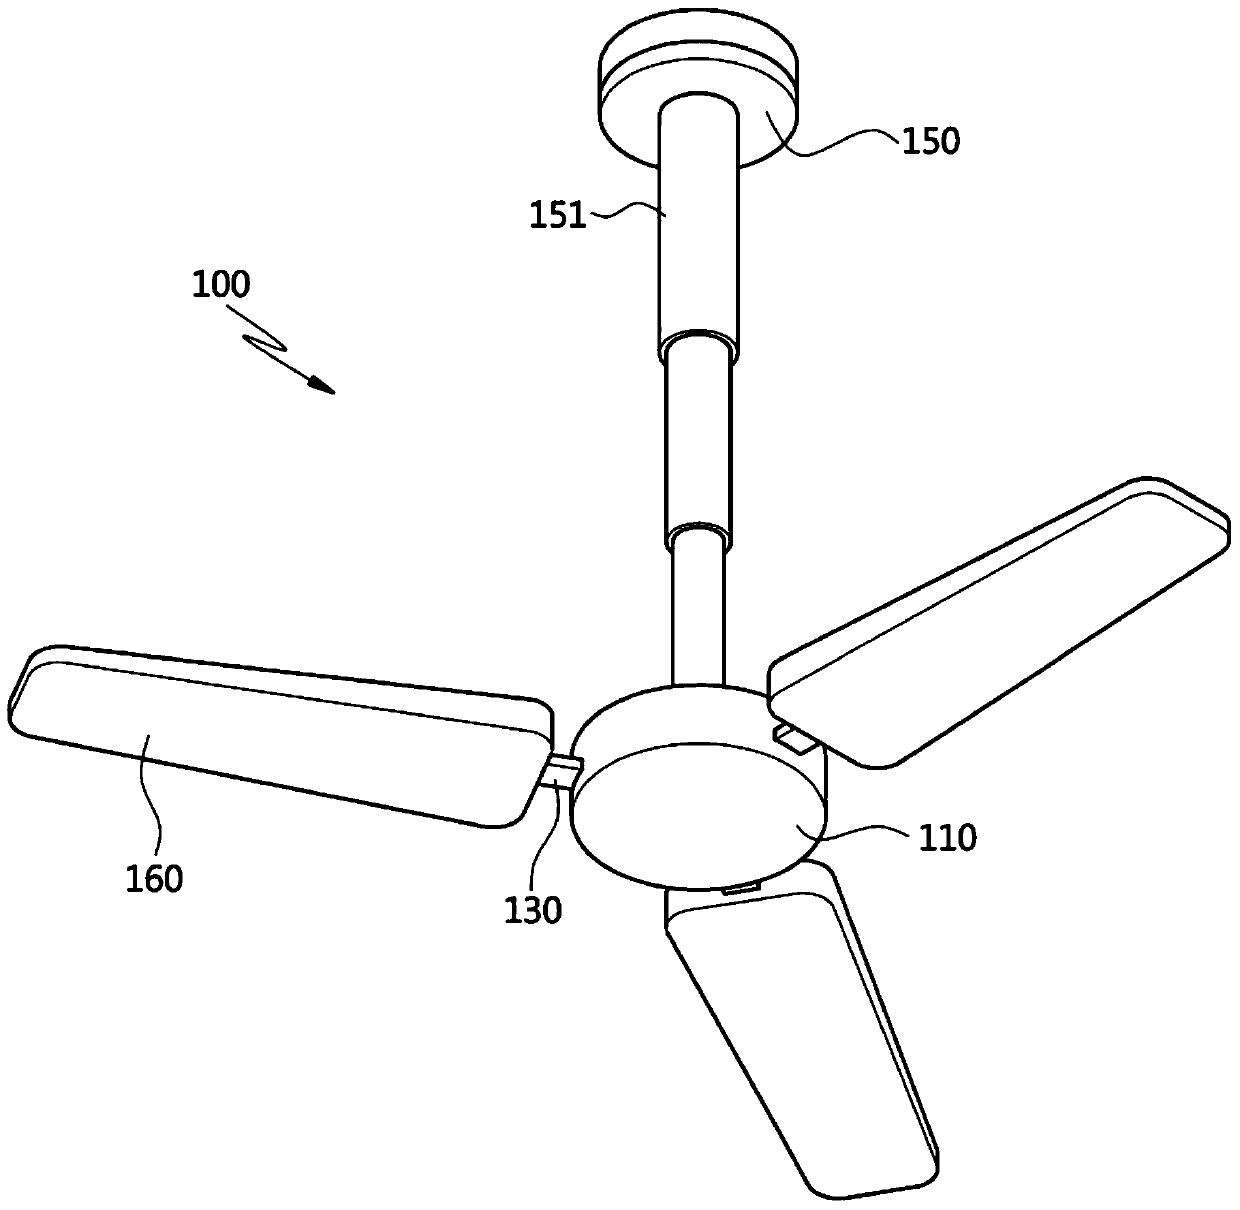 Ceiling-attached multi-function fan with sterilizing and purifying part for polluted air